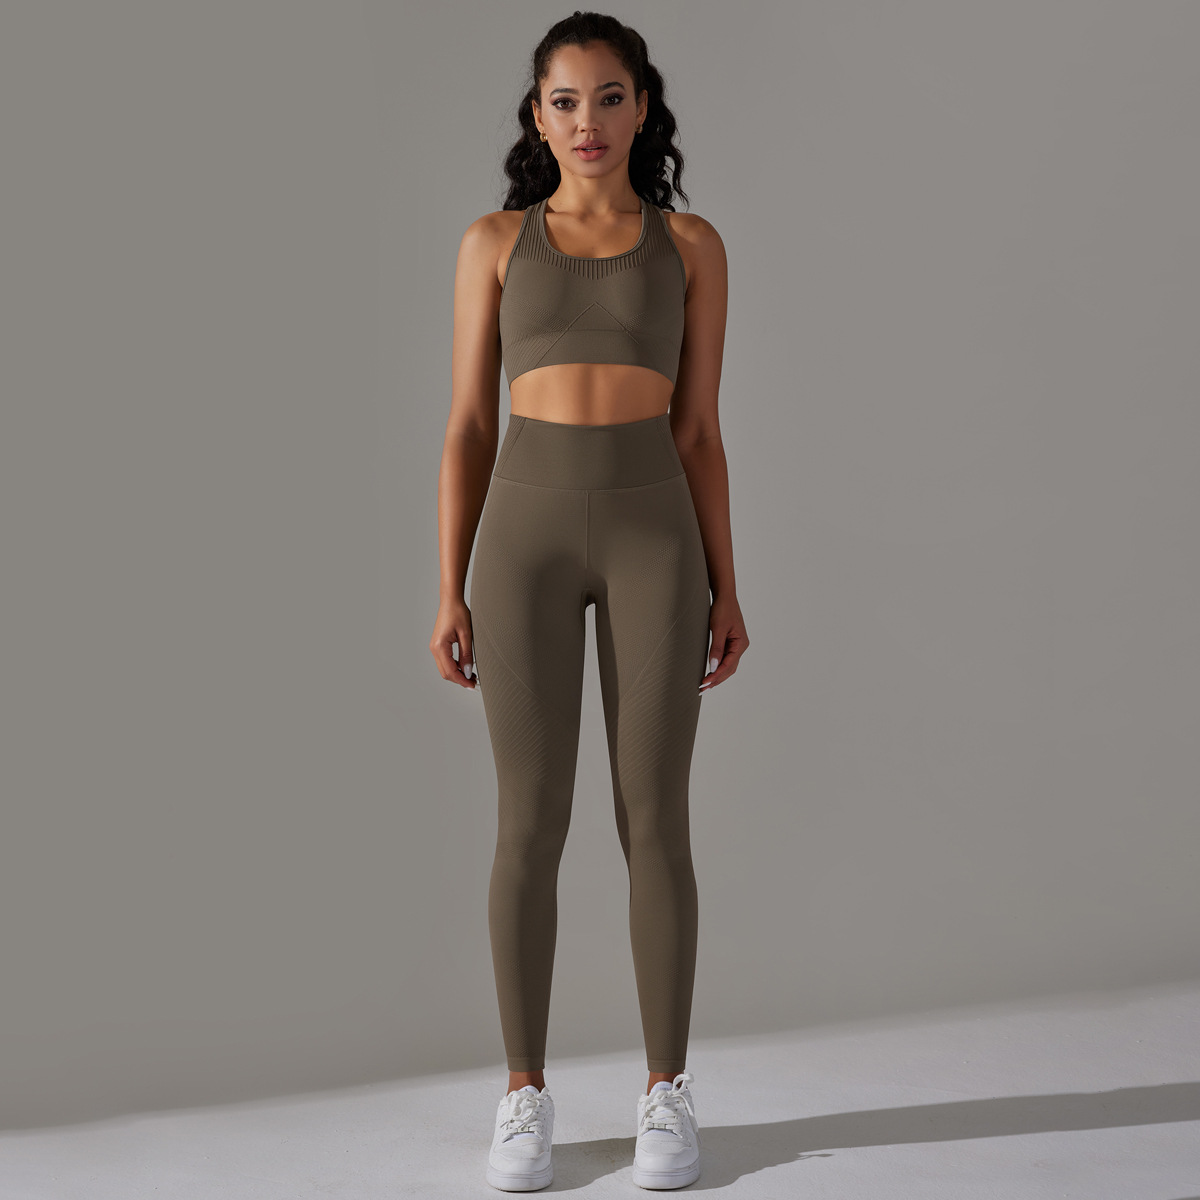 athletic clothing manufacturers